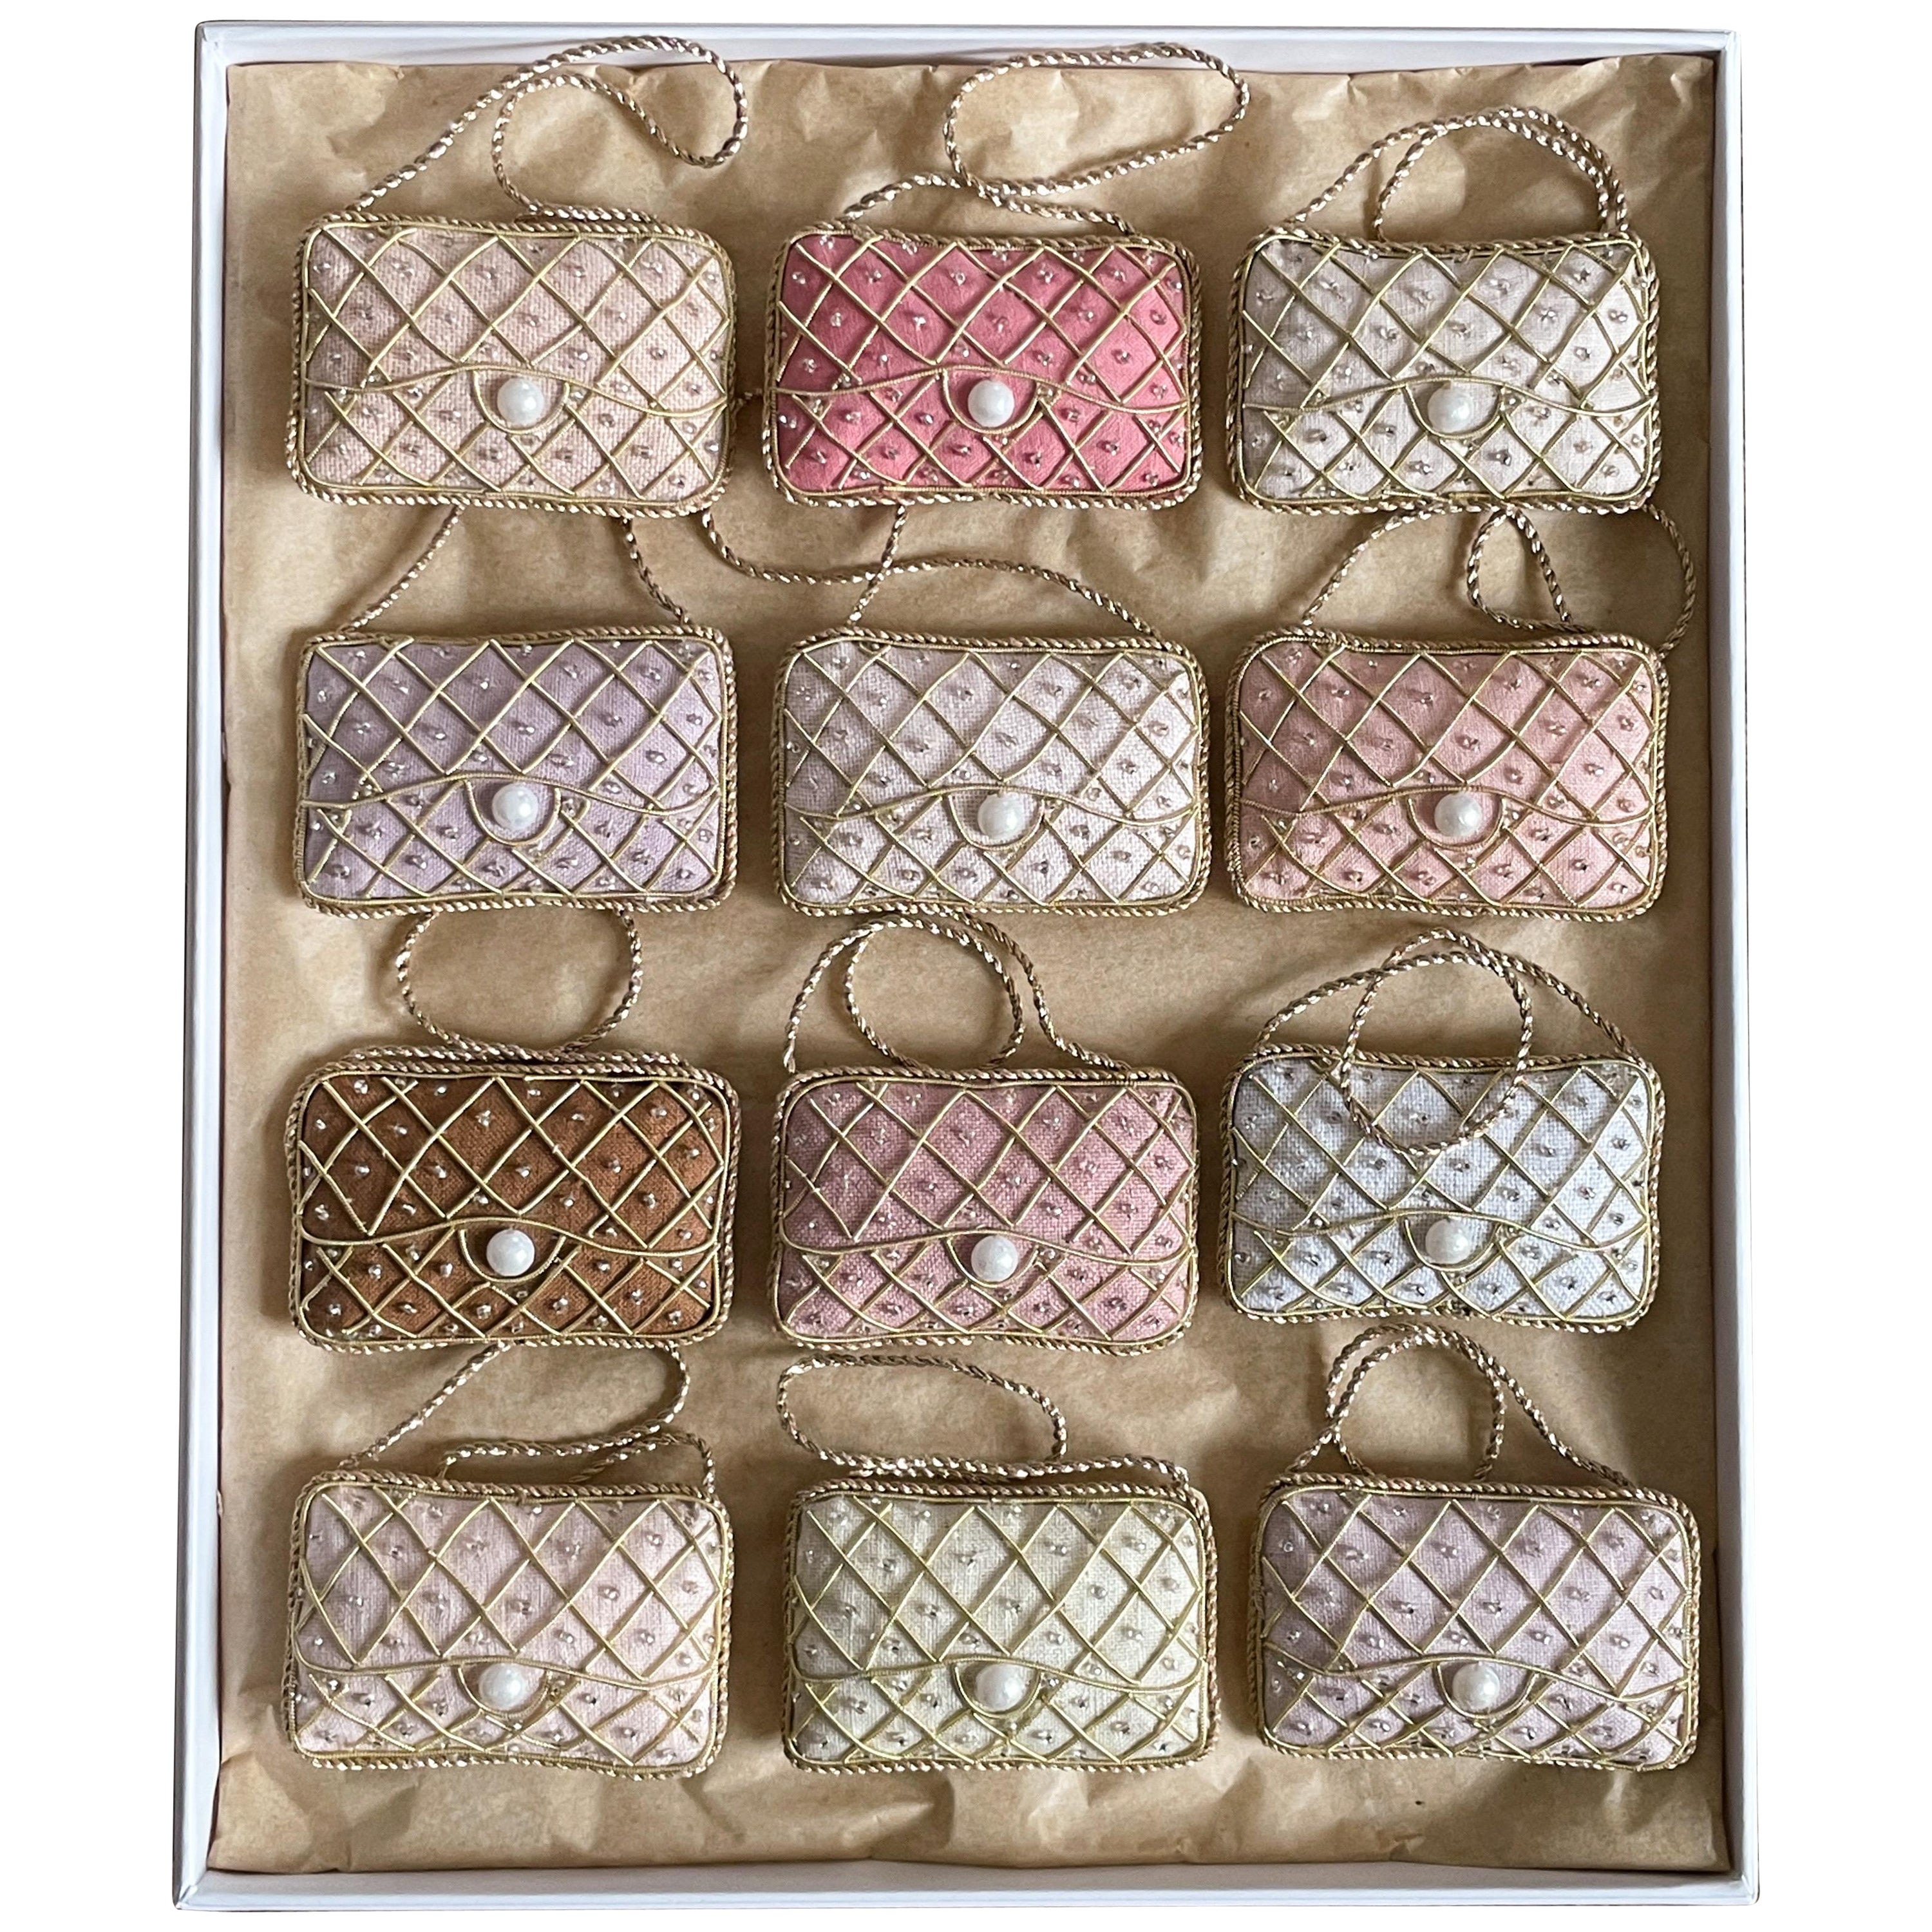 Set of 12 limited edition artisan Irish linen vintage quilted handbag Ornaments by Katie Larmour

This is a luxury box set of artisan made decorative ornaments created with authentic Irish Linen, exclusive to 1stdibs. They are special because they